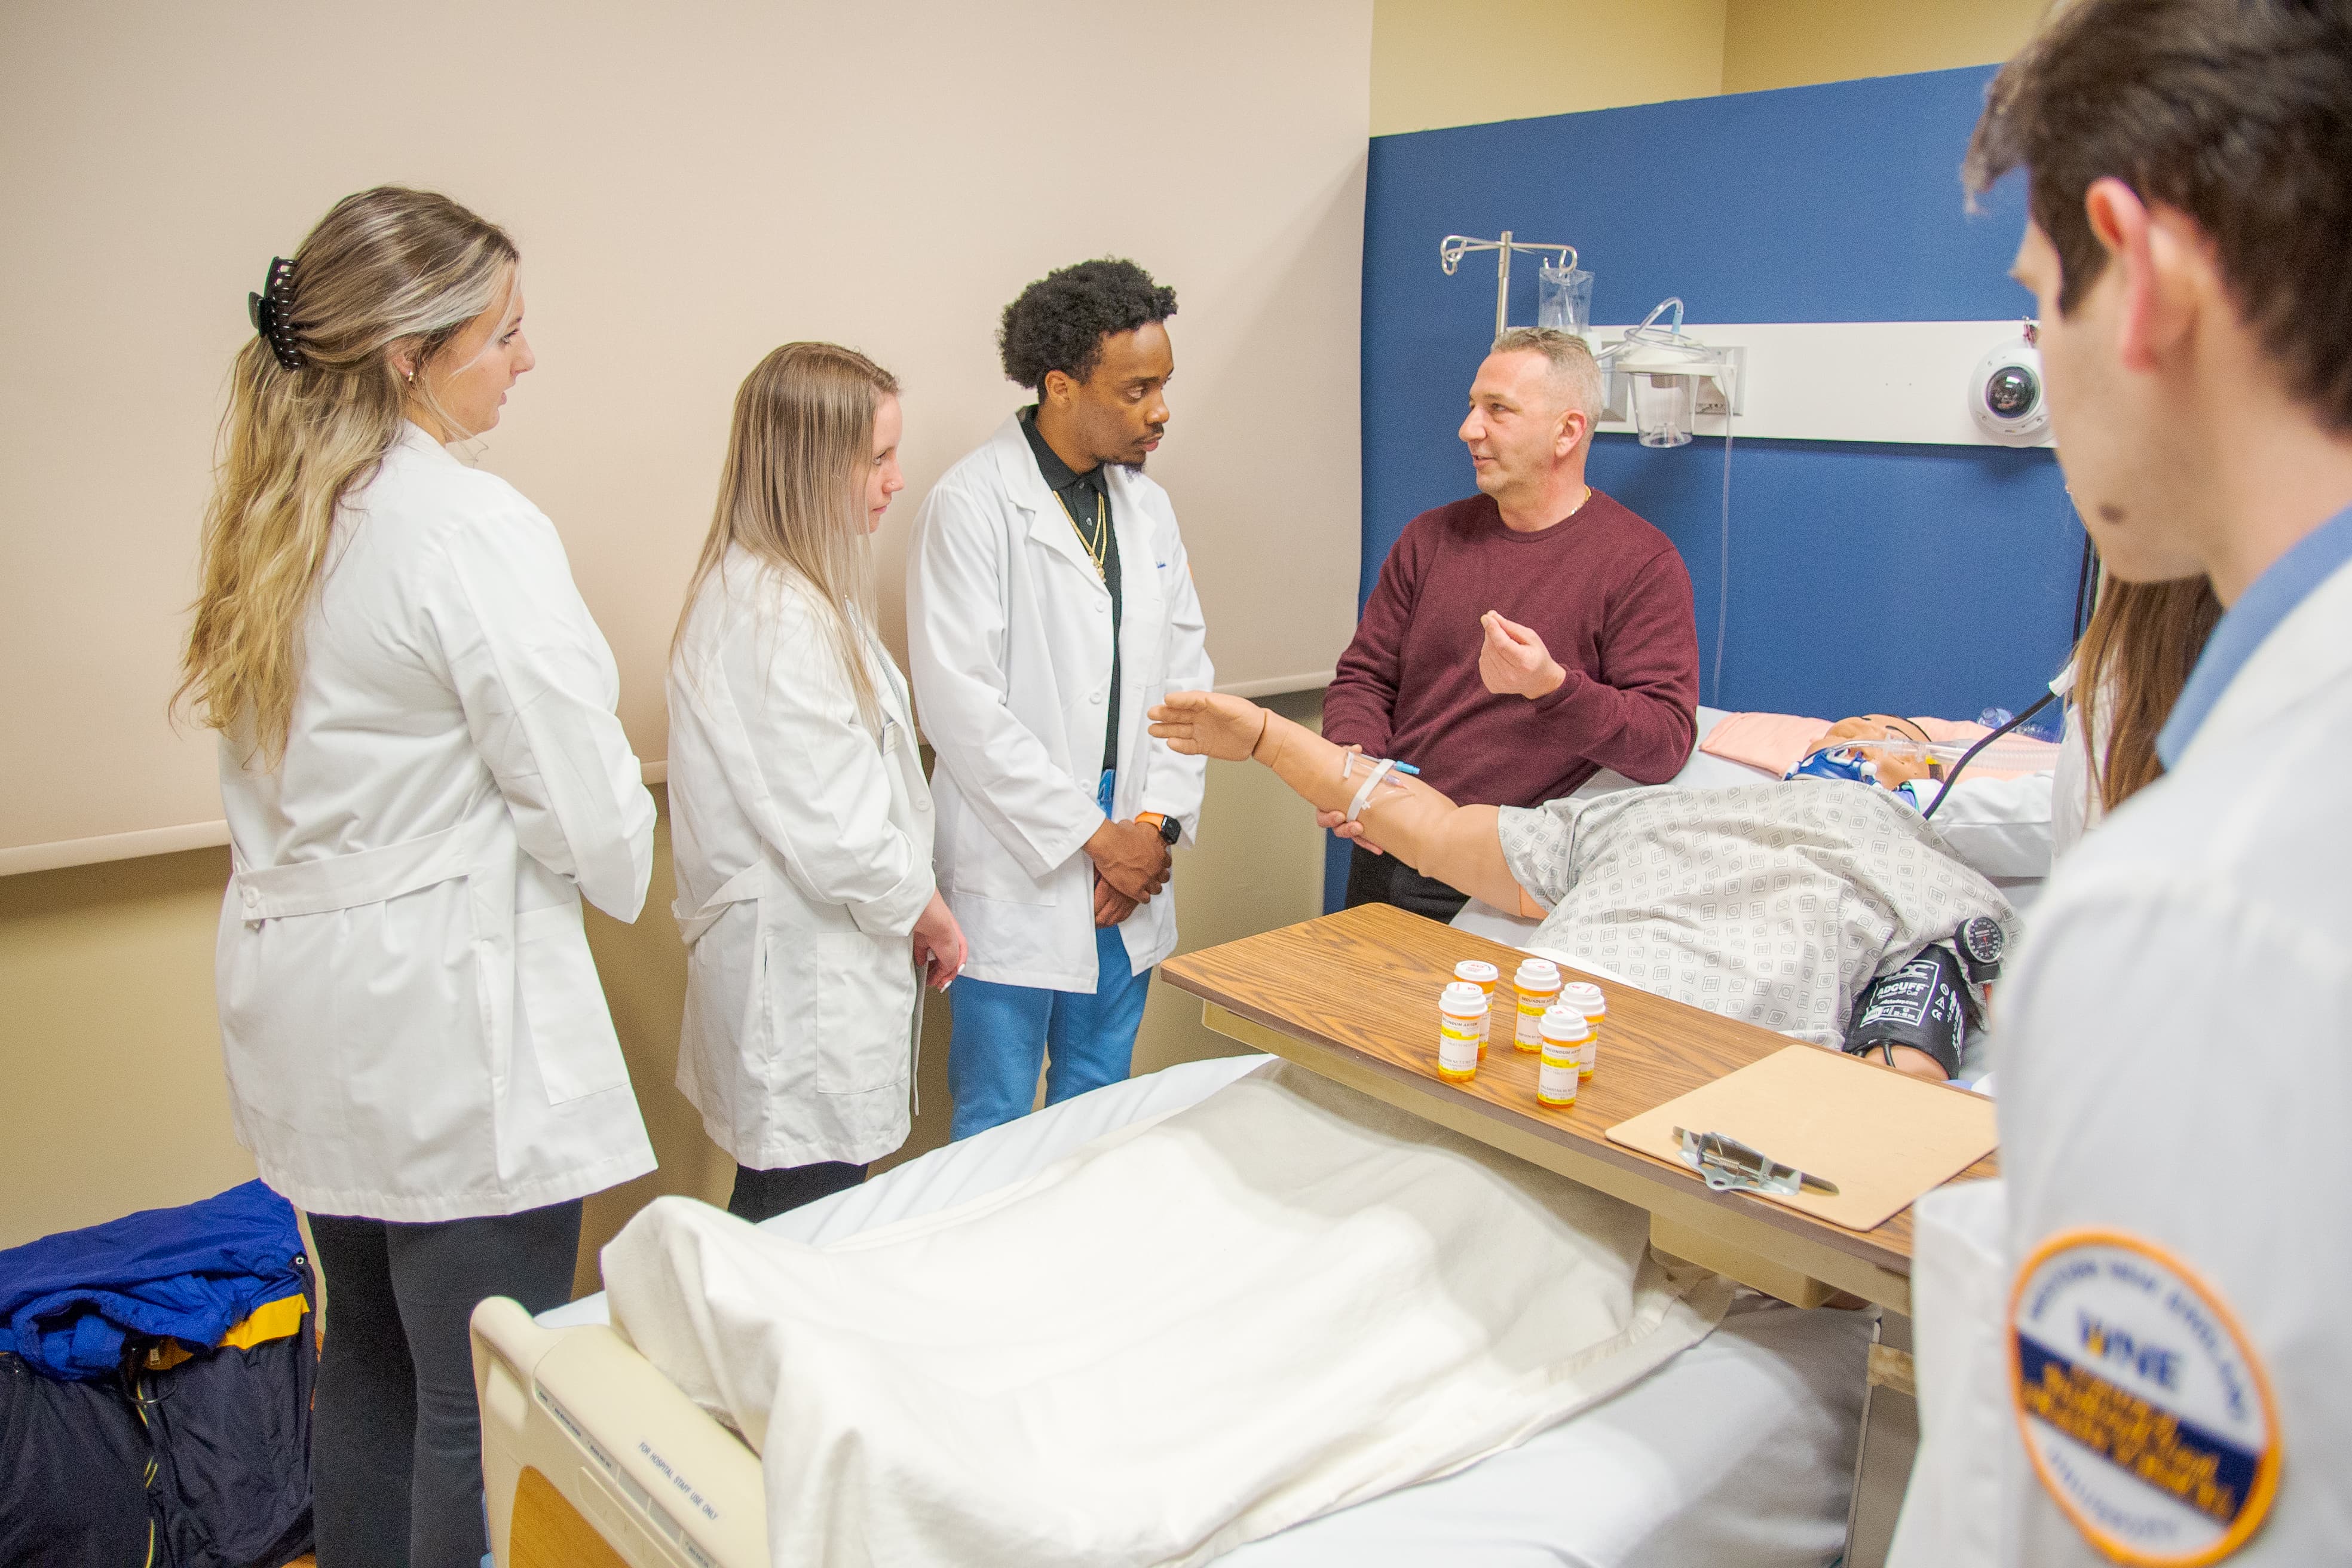 Professor with students in hospital setting